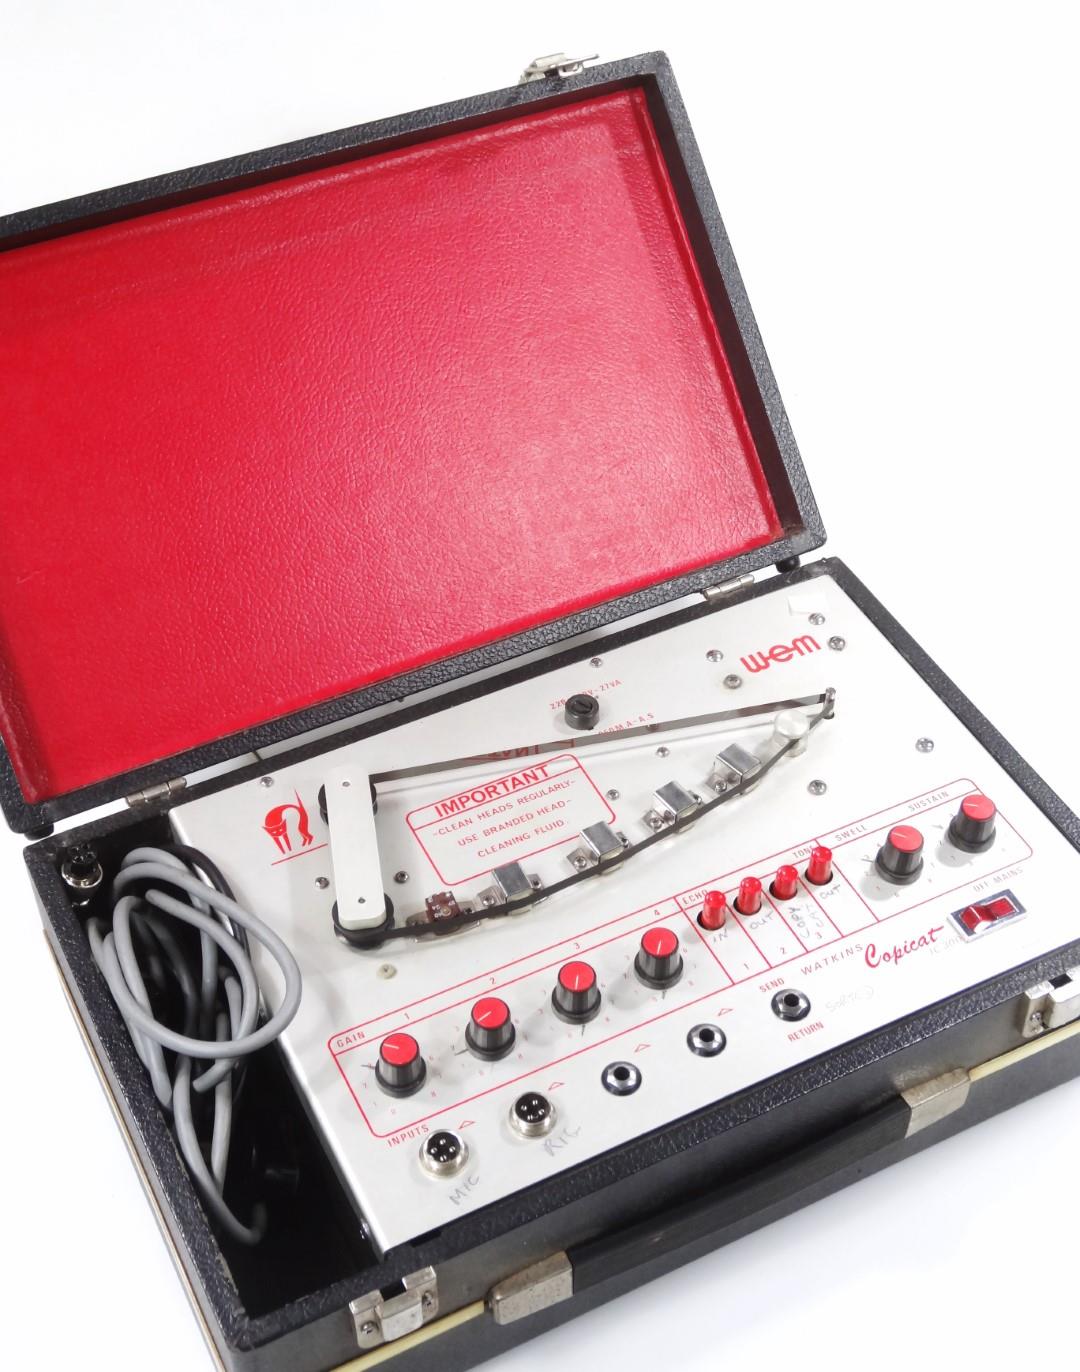 A WEM Copi Cat IC300 reel to reel recorder, in fitted case, with accessories, 40cm wide.